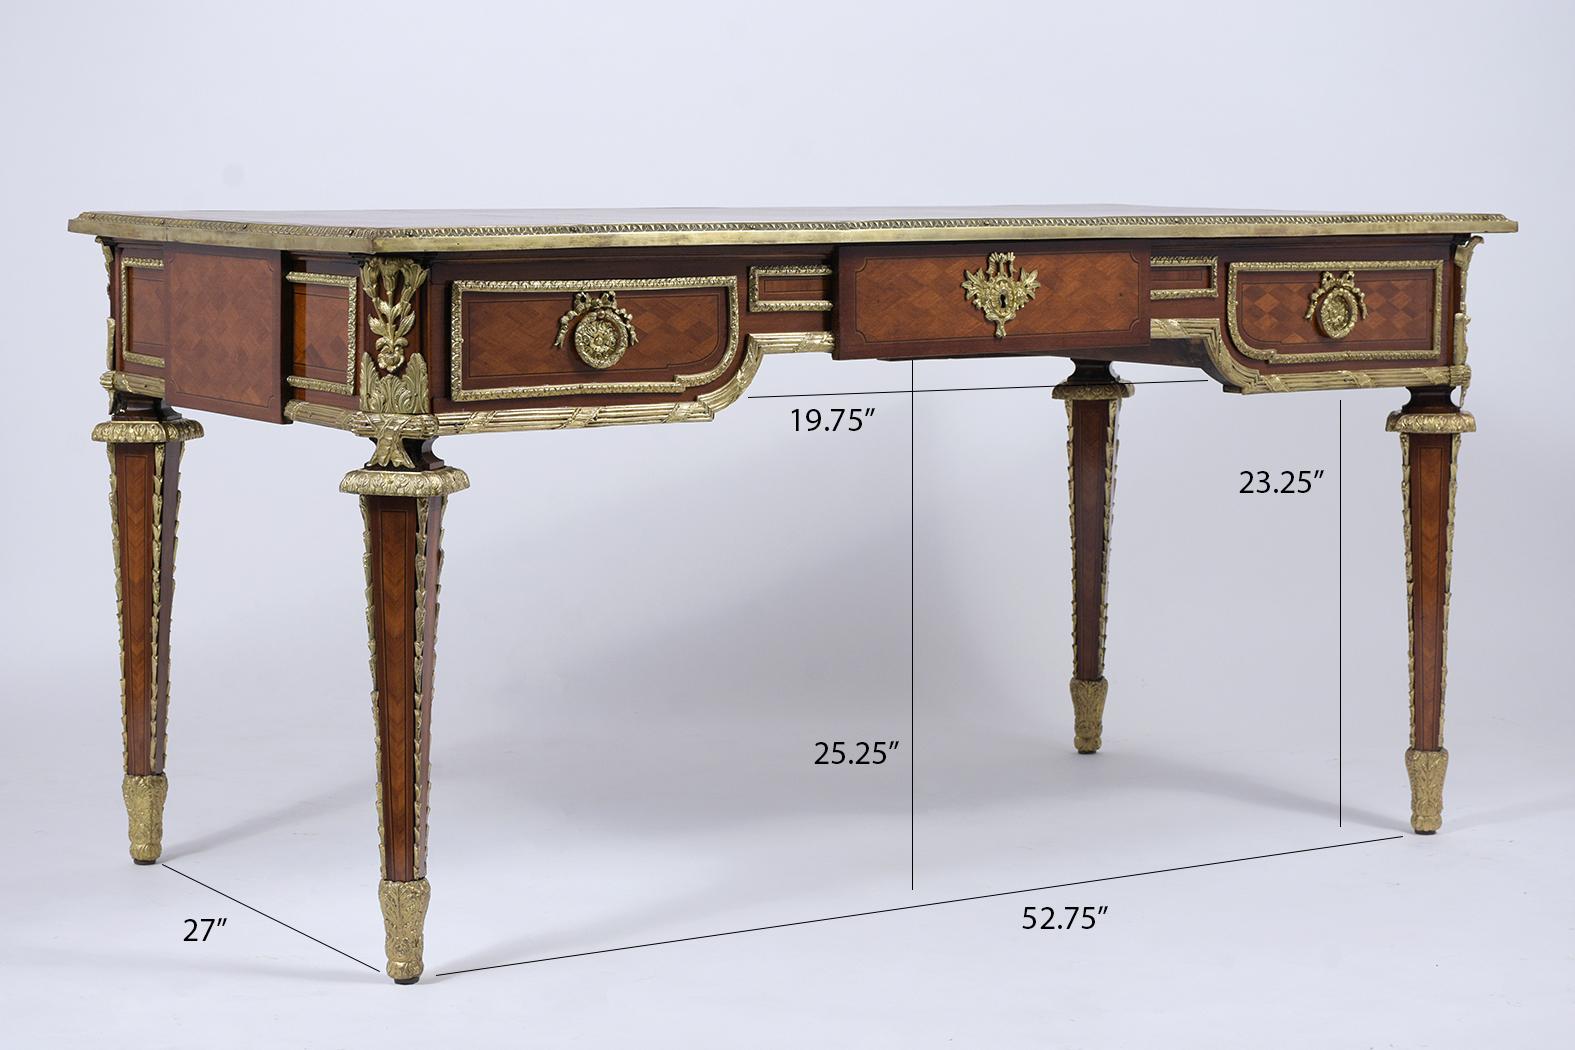 This Antique Louis XVI Desk is made of mahogany wood covered with remarkable marquetry veneers, and its original mahogany color sealed with a clear varnish finish has been professionally restored. This exceptional desk features the original Whiskey